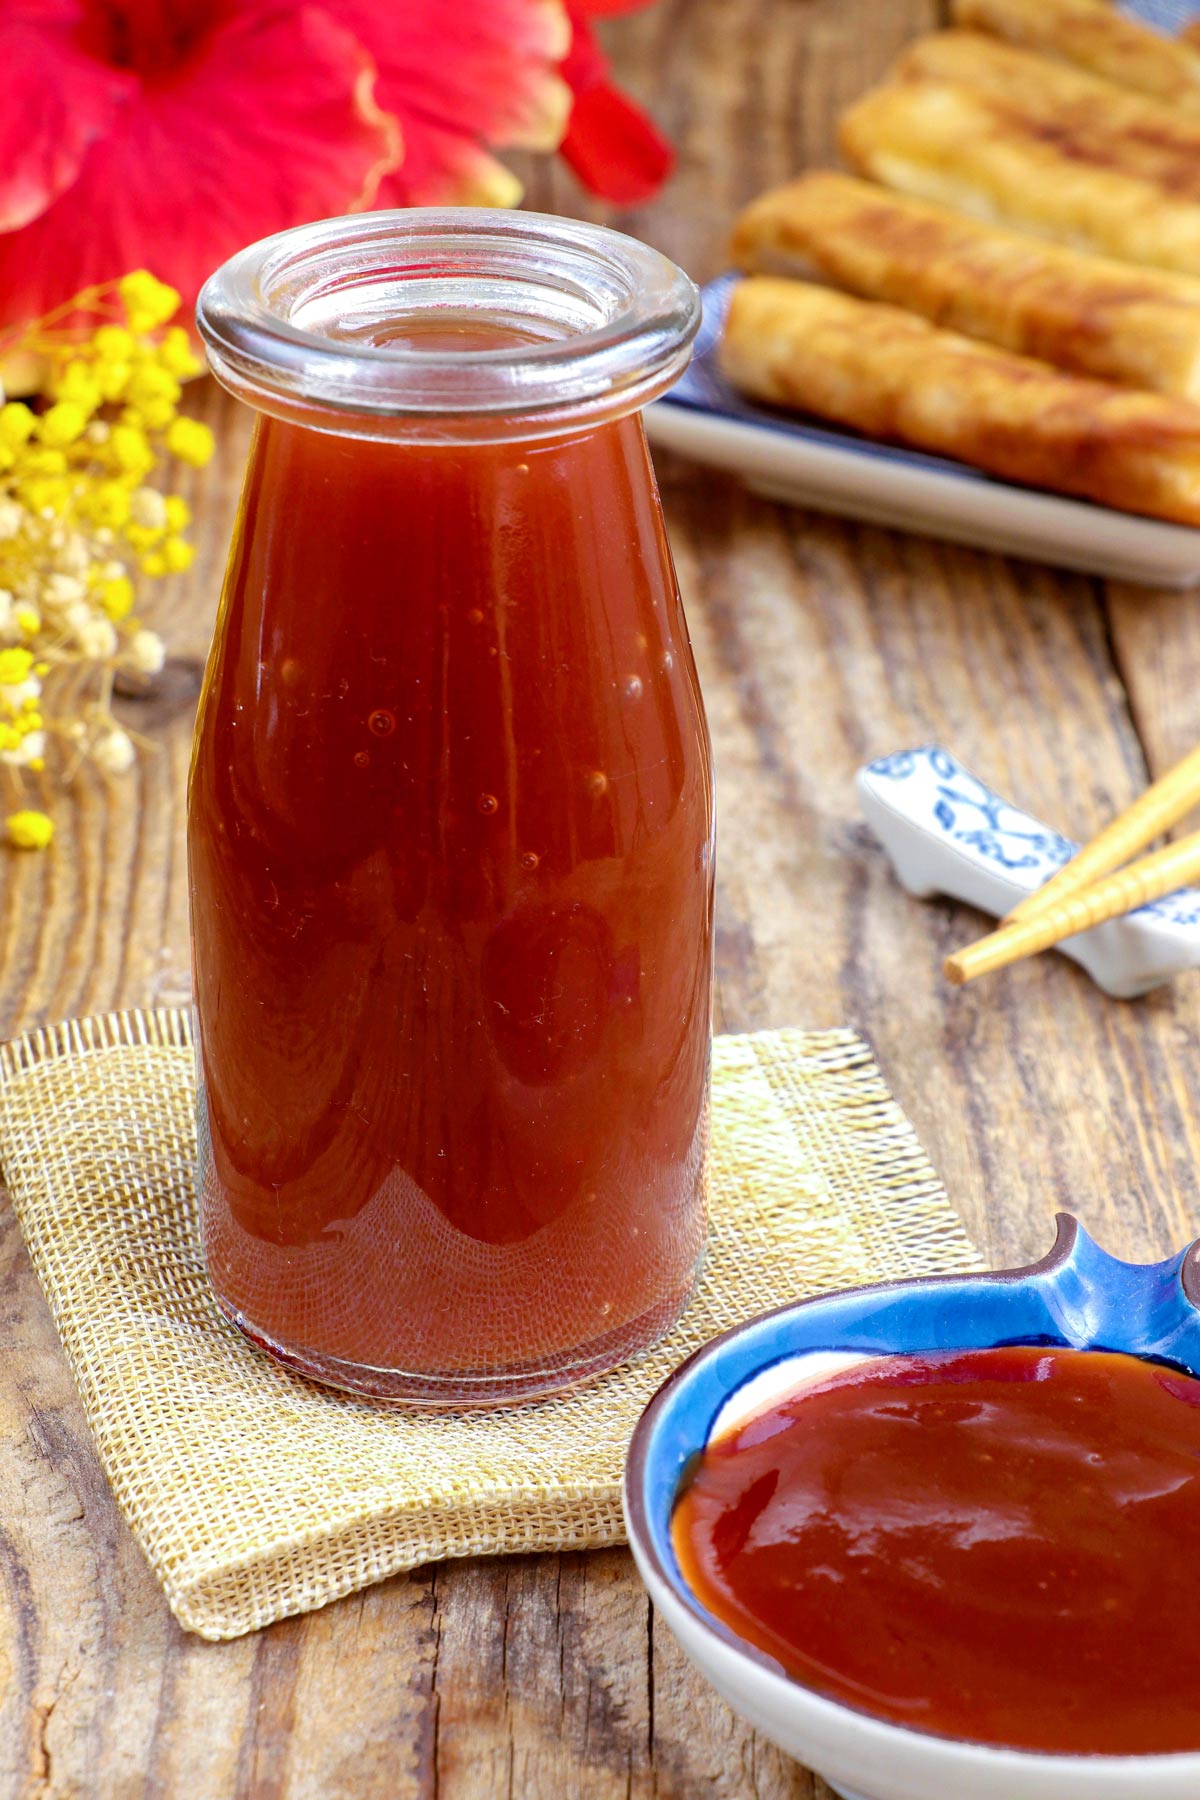 Sweet and sour sauce in a condiment jar as dipping sauce for fried spring rolls.